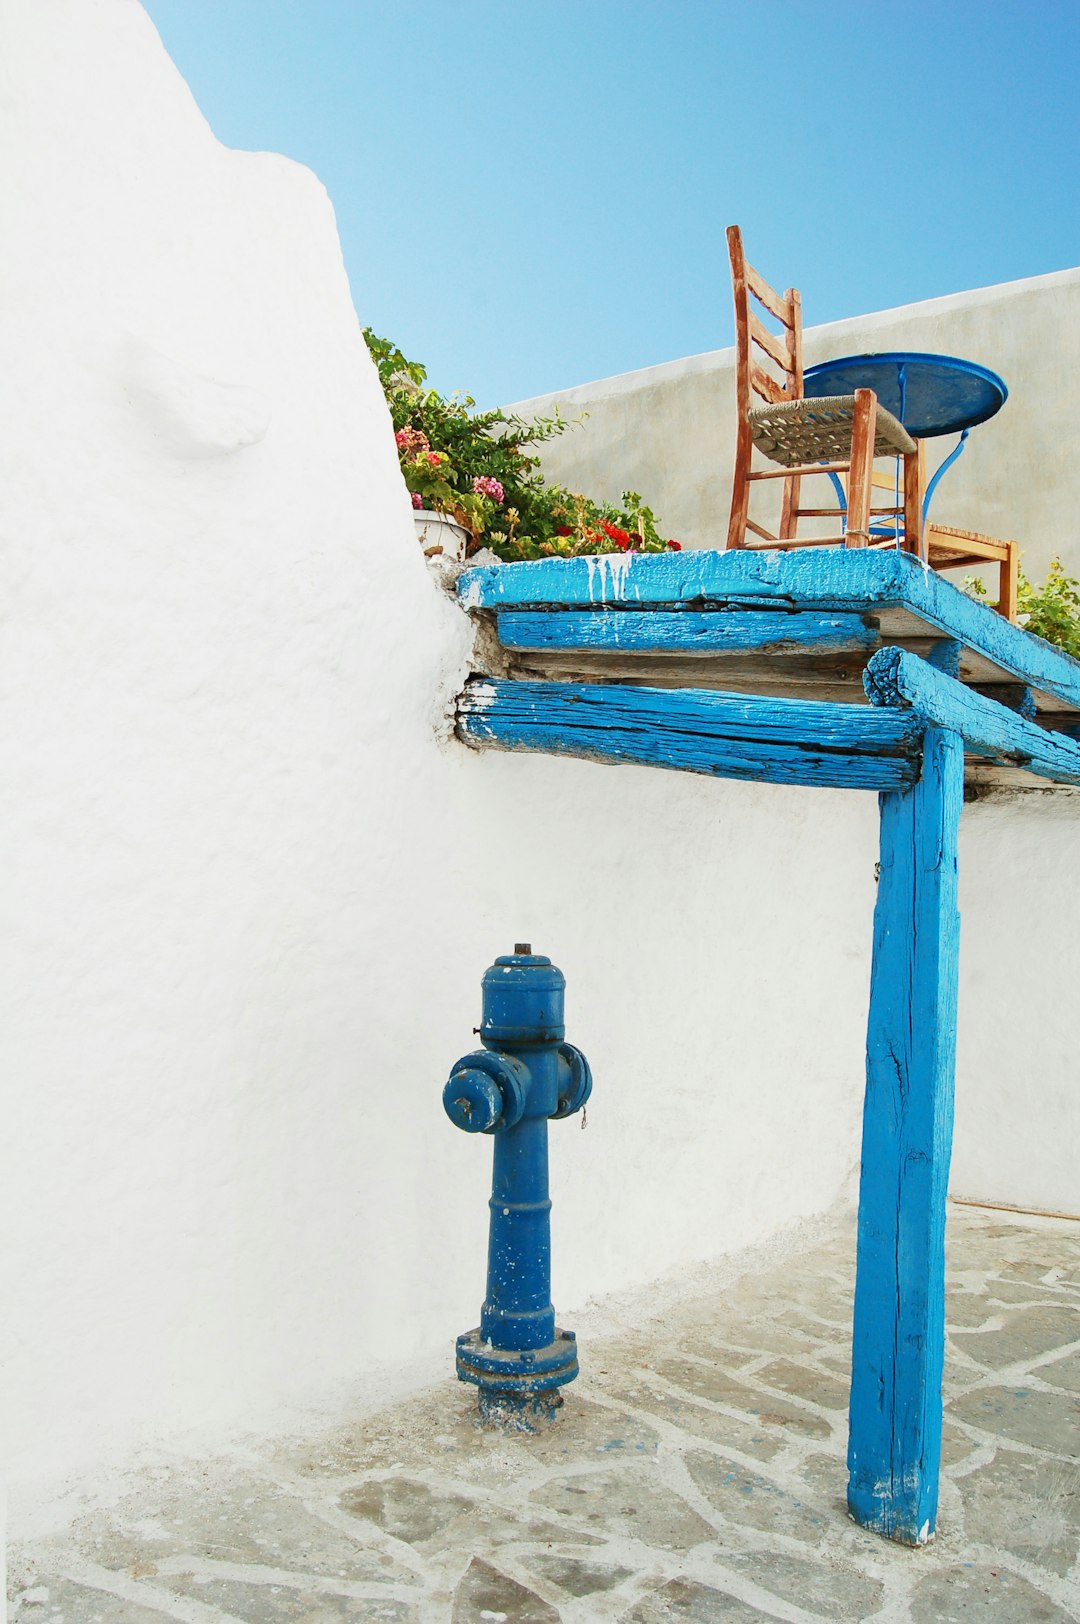 Travel Tips and Stories of Naxos in Greece